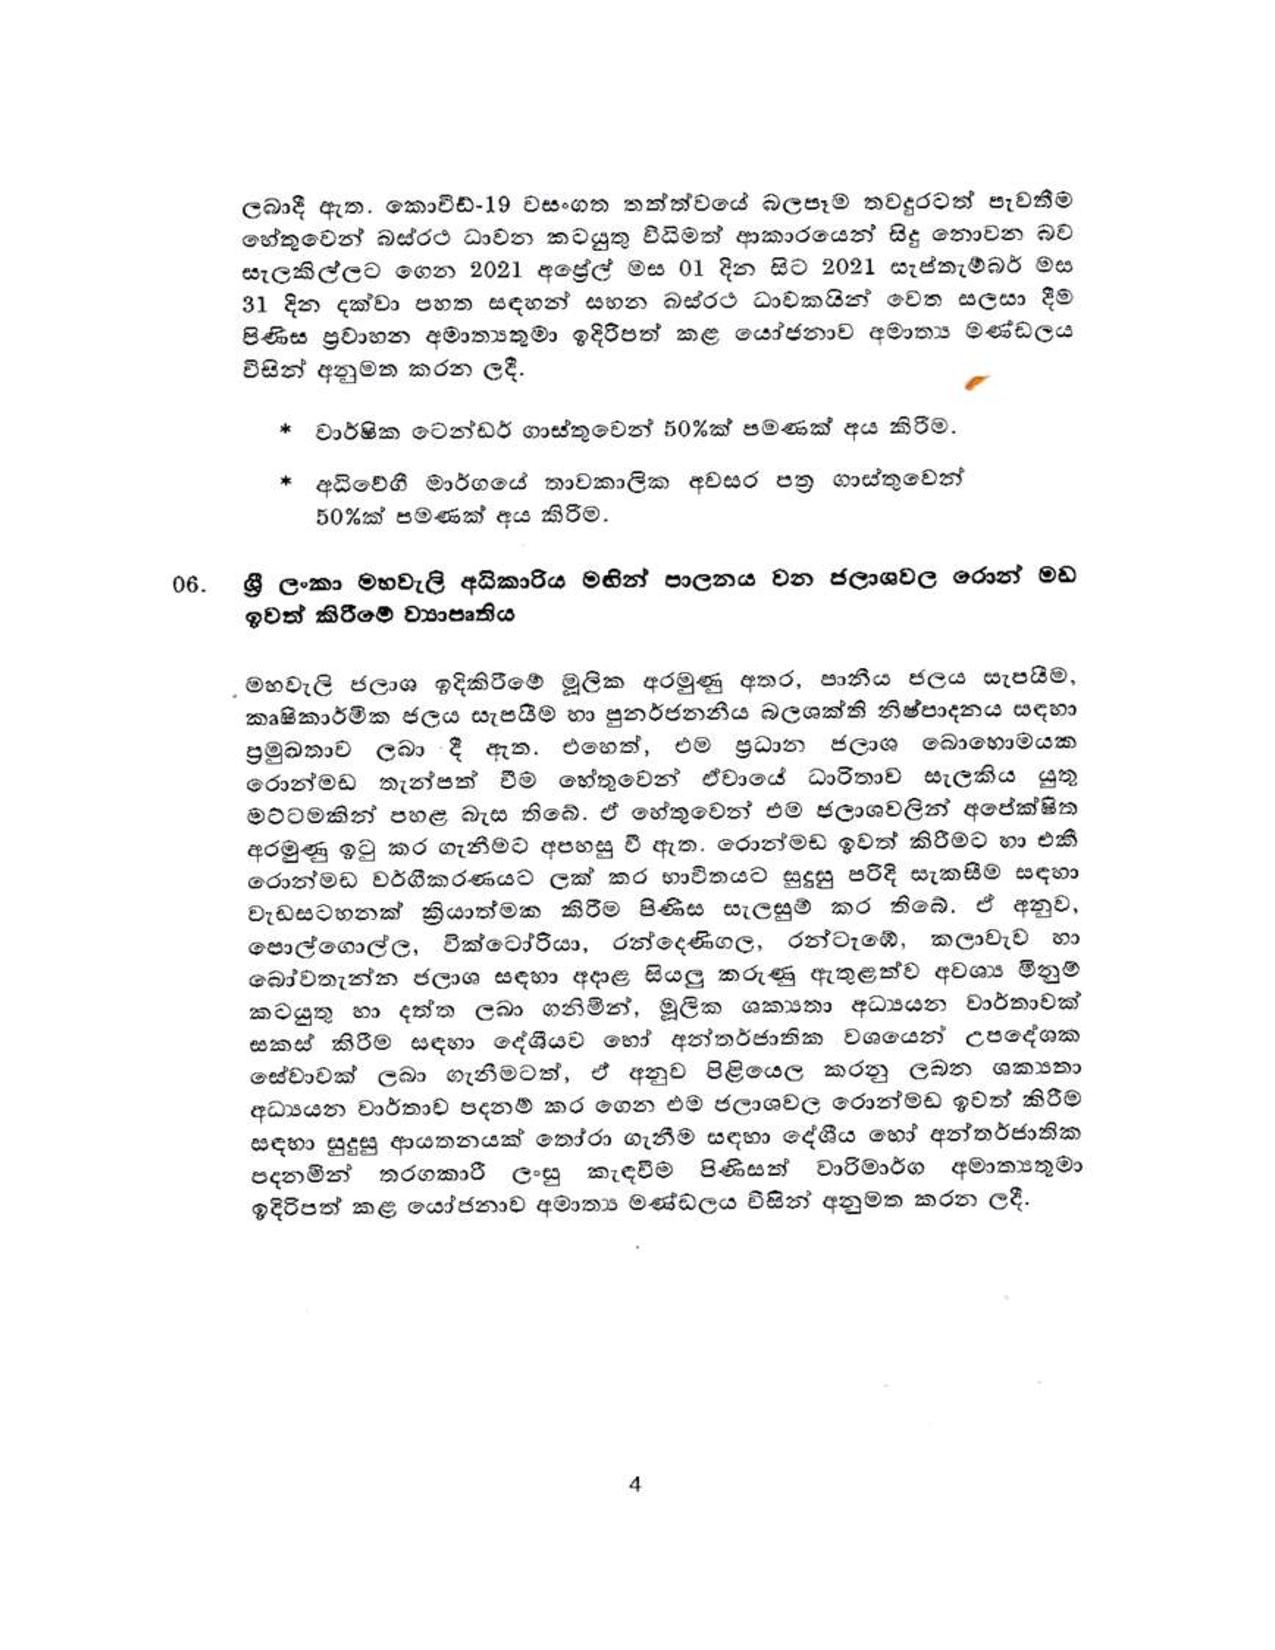 Cabinet Decision on 10.05.2021 page 004